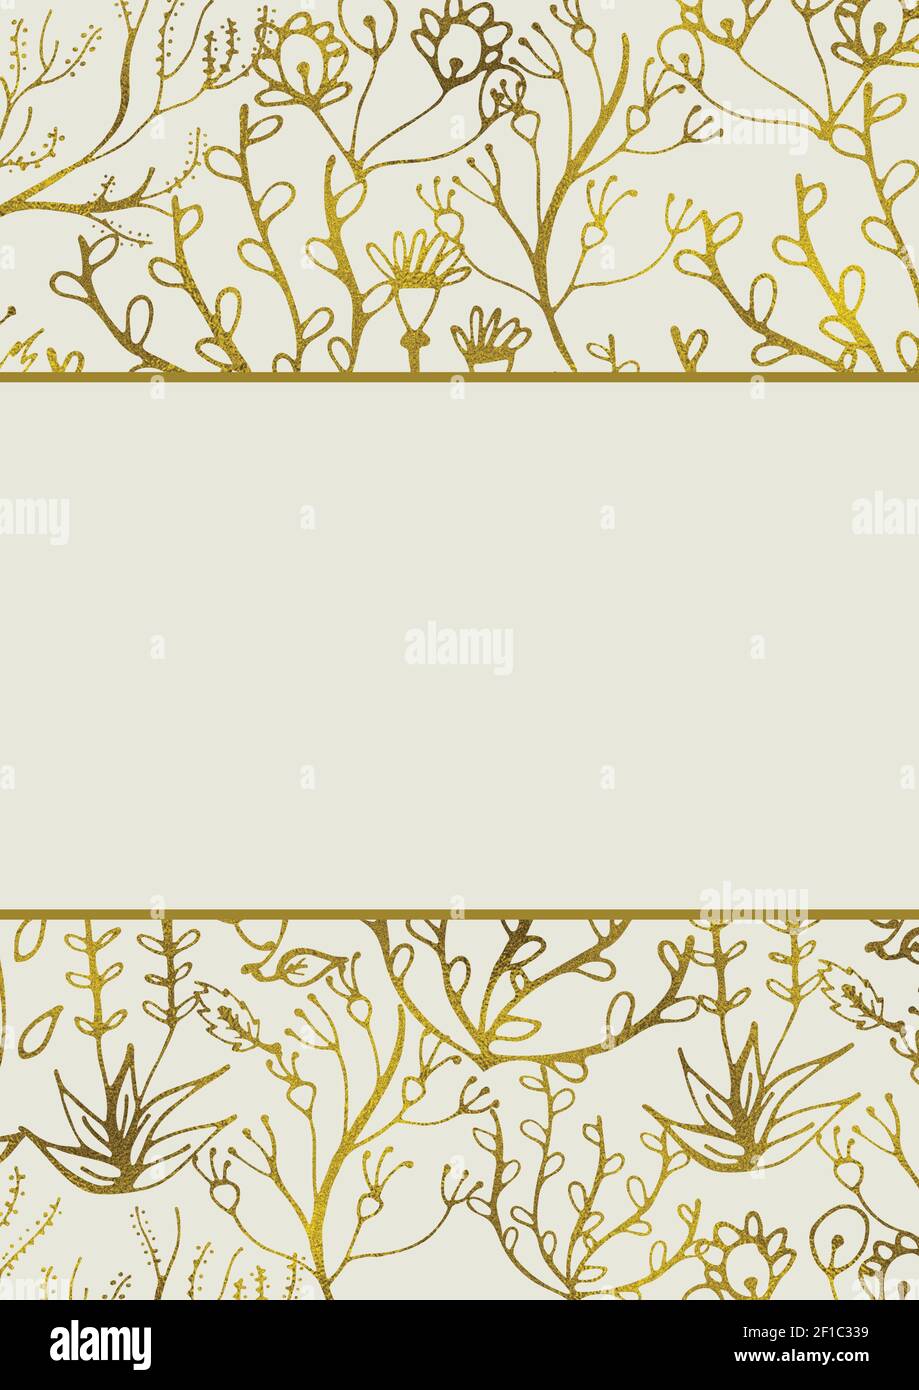 Illustration of brown outlined plants with cream copy space in the middle Stock Photo